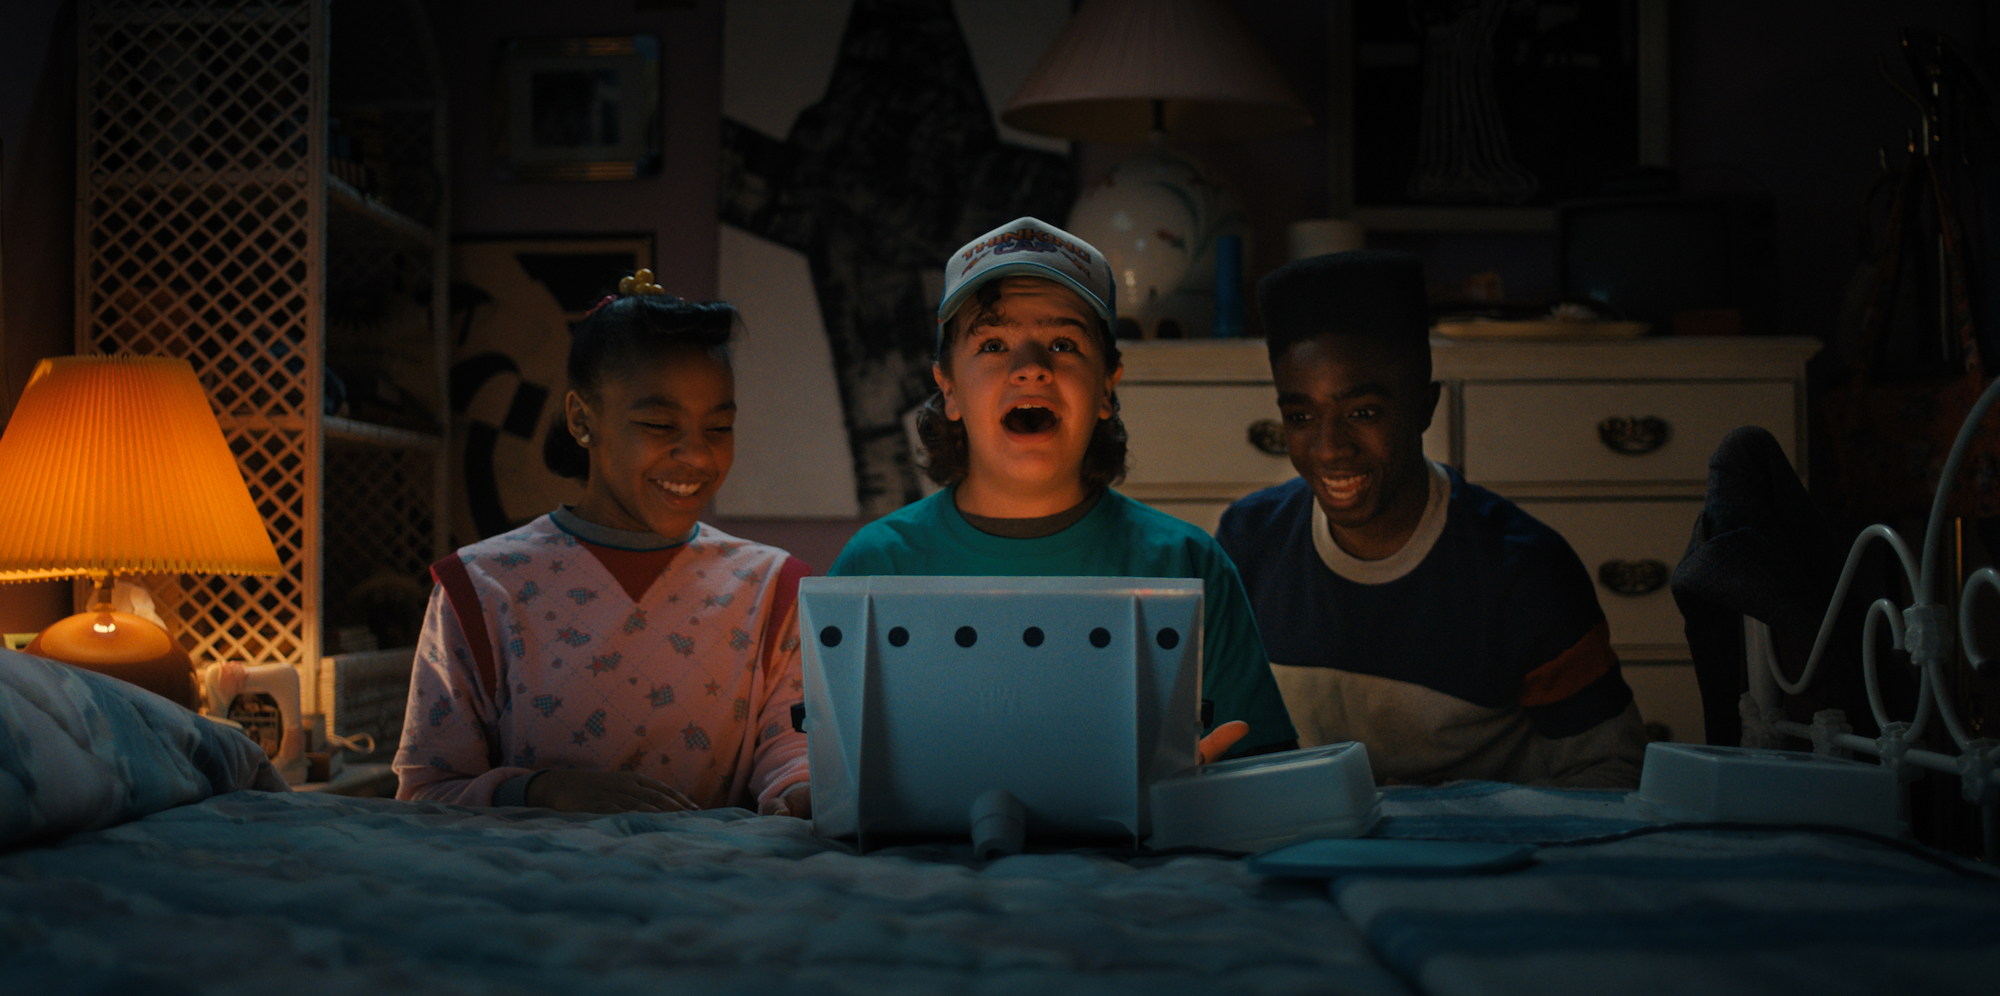 Priah Ferguson, Gaten Matarazzo, and Caleb Mclaughlin in front of a Lite Brite in a production still from "The Massacre at Hawkins Lab"